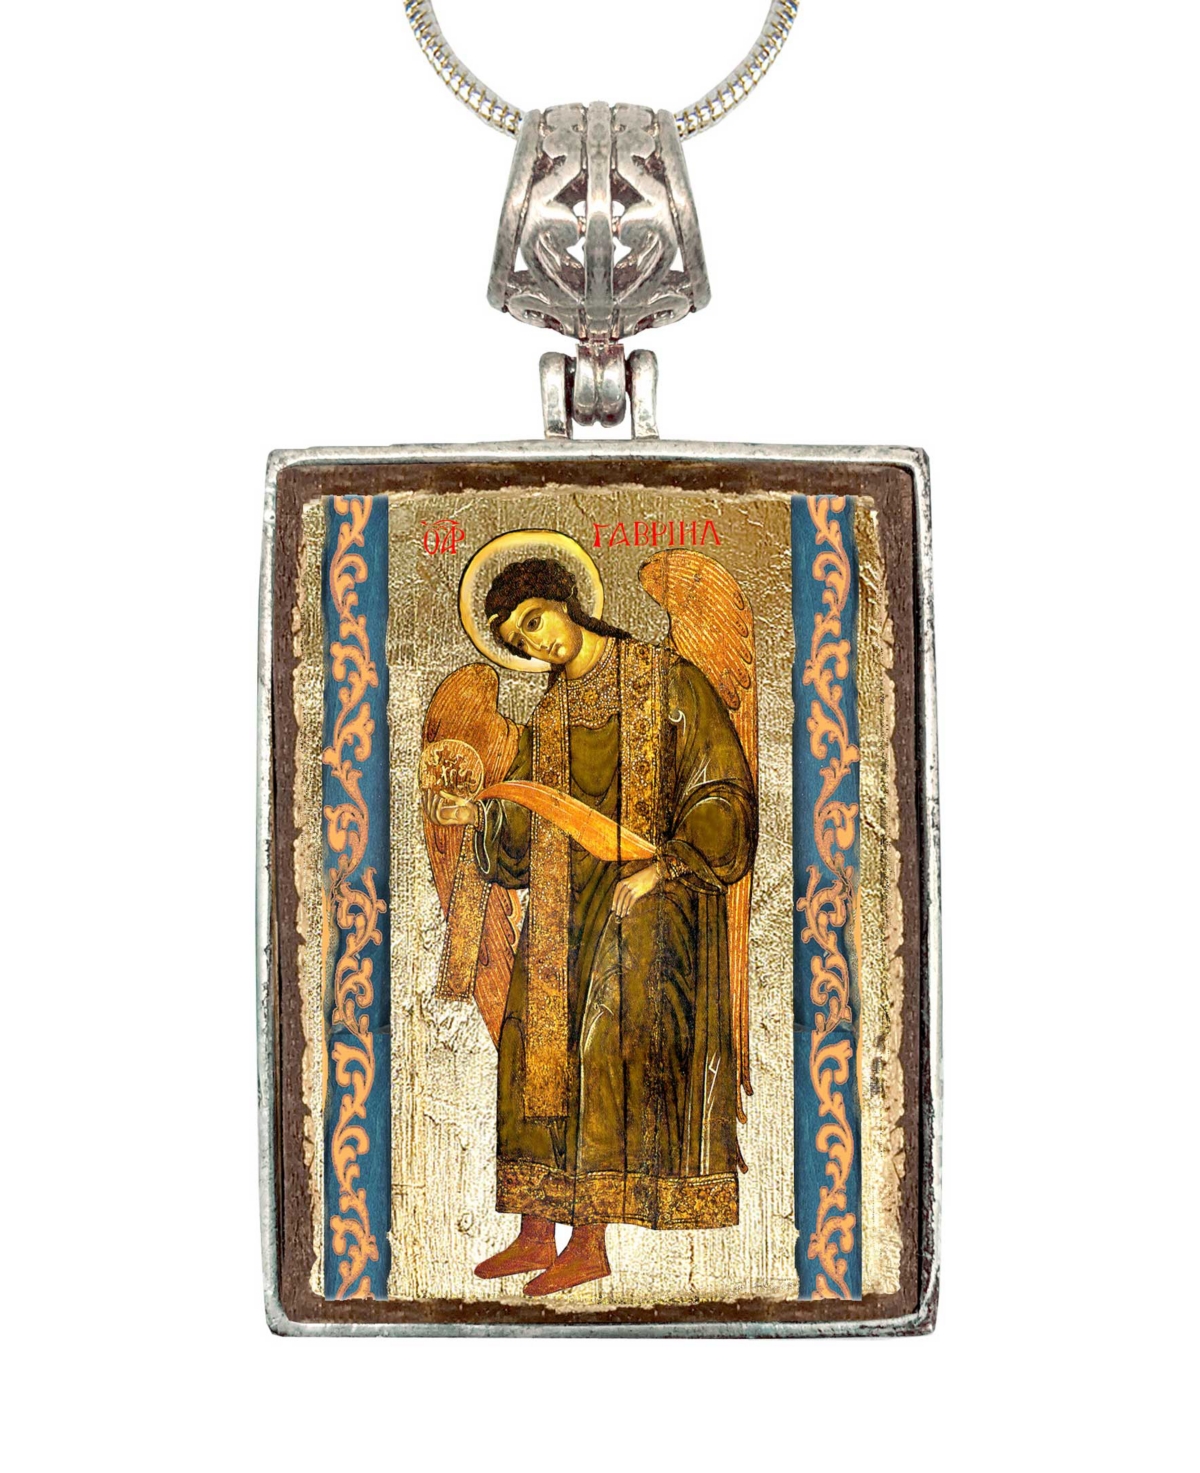 Saint Gabriel Archangel Religious Holiday Jewelry Necklace Monastery Icons - Multi Color